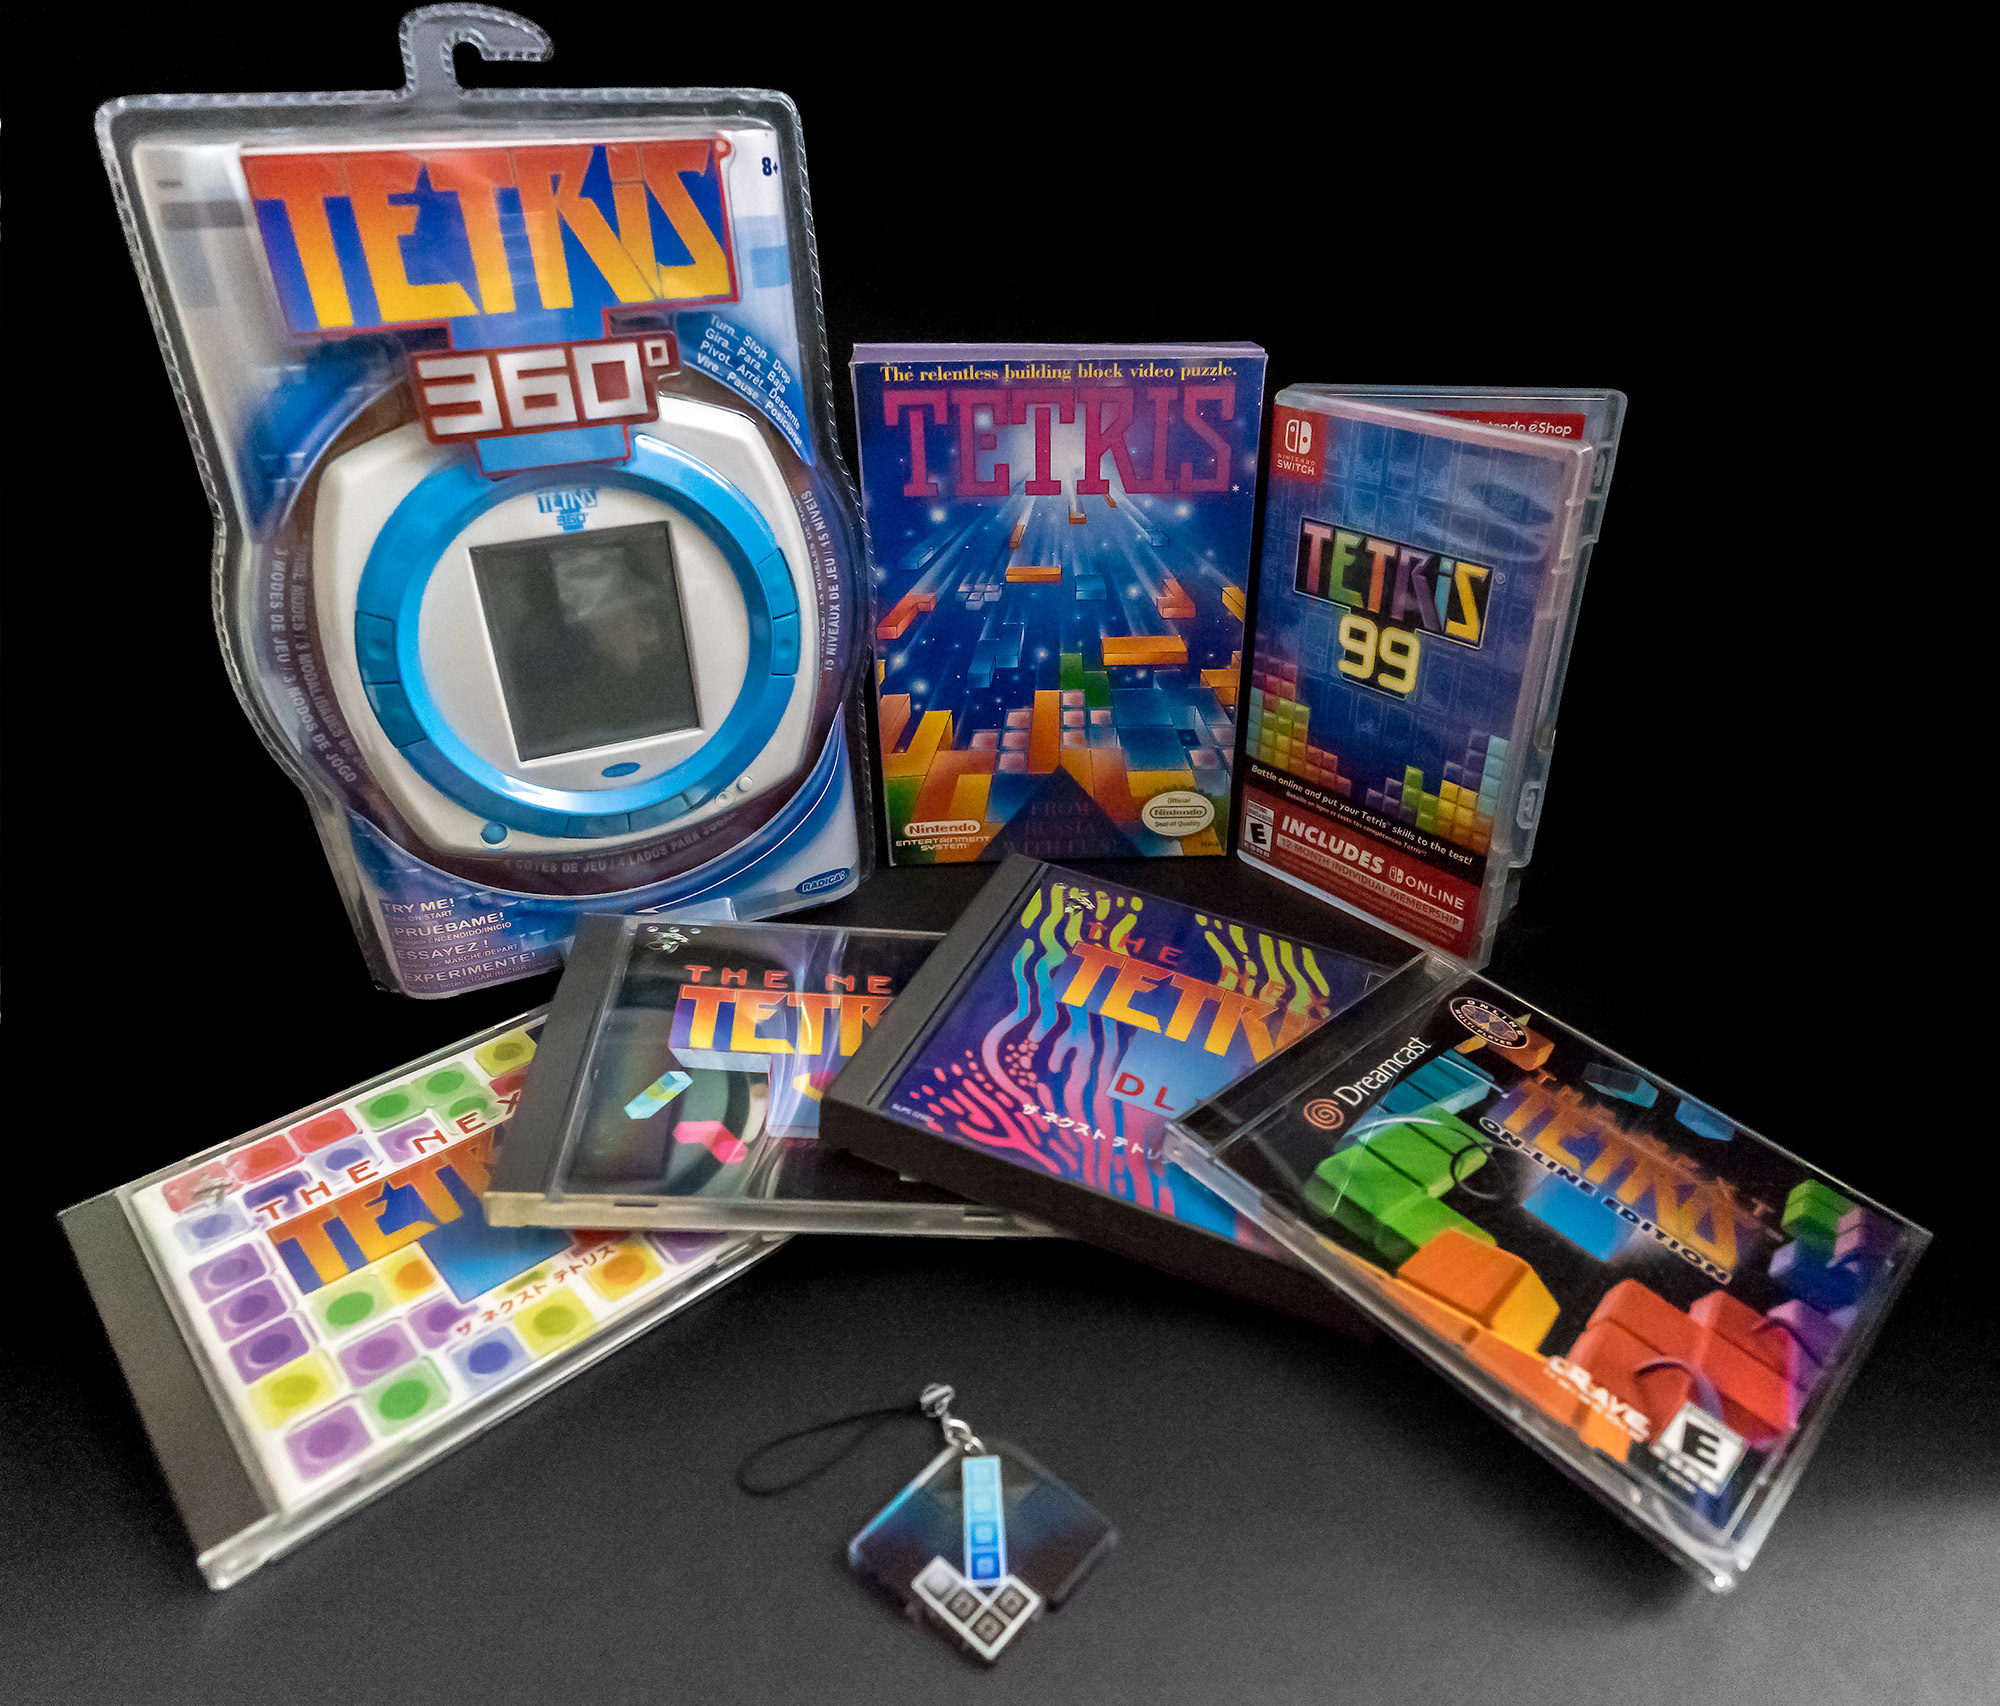 A photo showing seven Tetris related items, neatly arranged against a black backdrop. From top left to bottom right, Tetris 360, Tetris for NES, Tetris 99, three Japanese versions of the game The Next Tetris for PlayStation, The Next Tetris for Dreamcast, and a keychain made by the Hard Drop community.